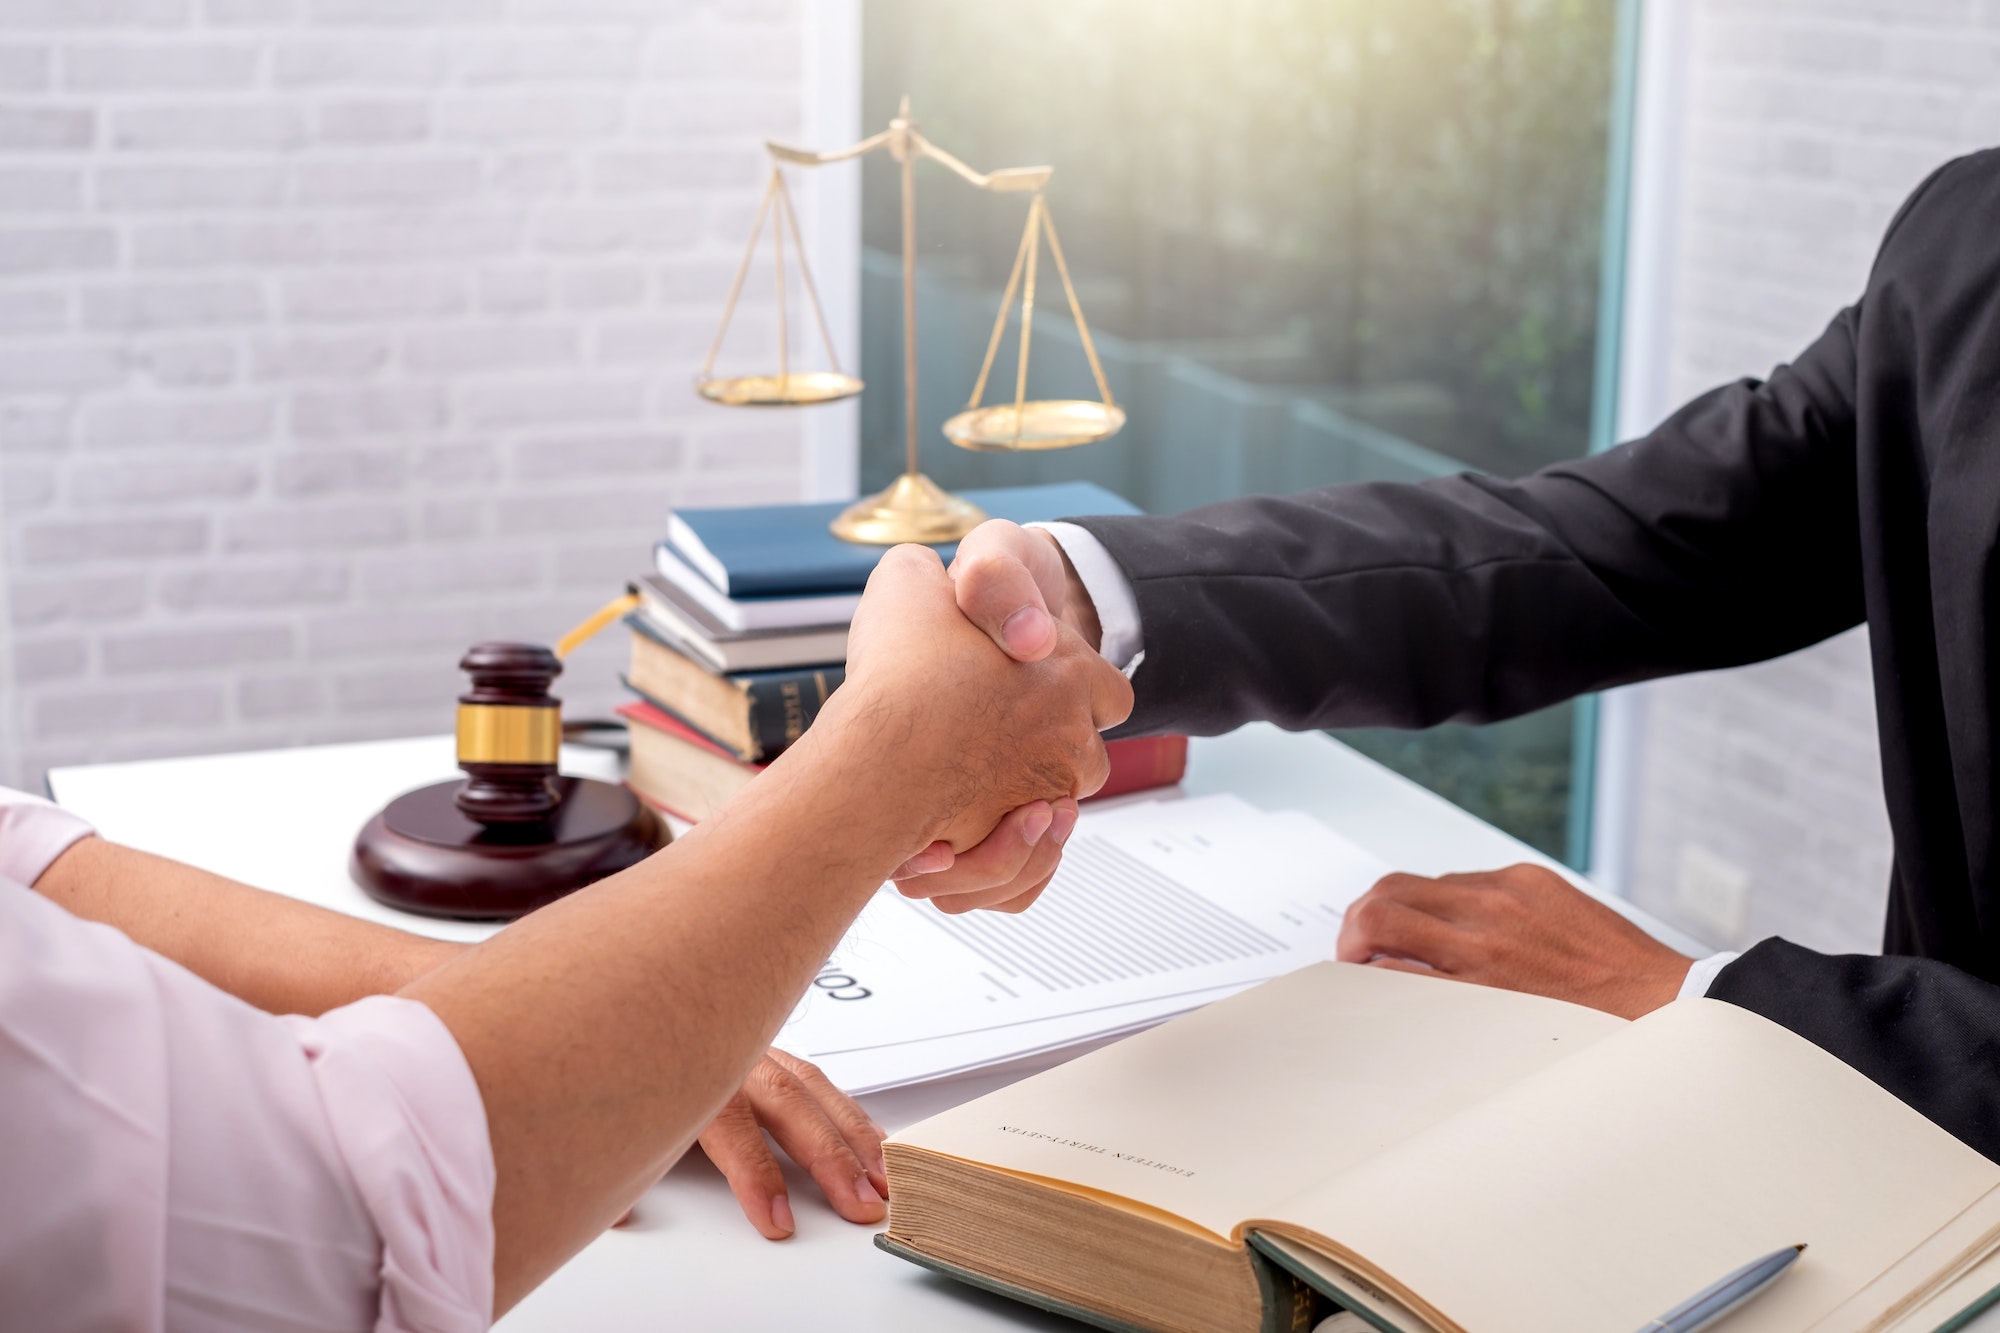 Businessman shaking hands to seal a deal with his partner lawyers or attorney